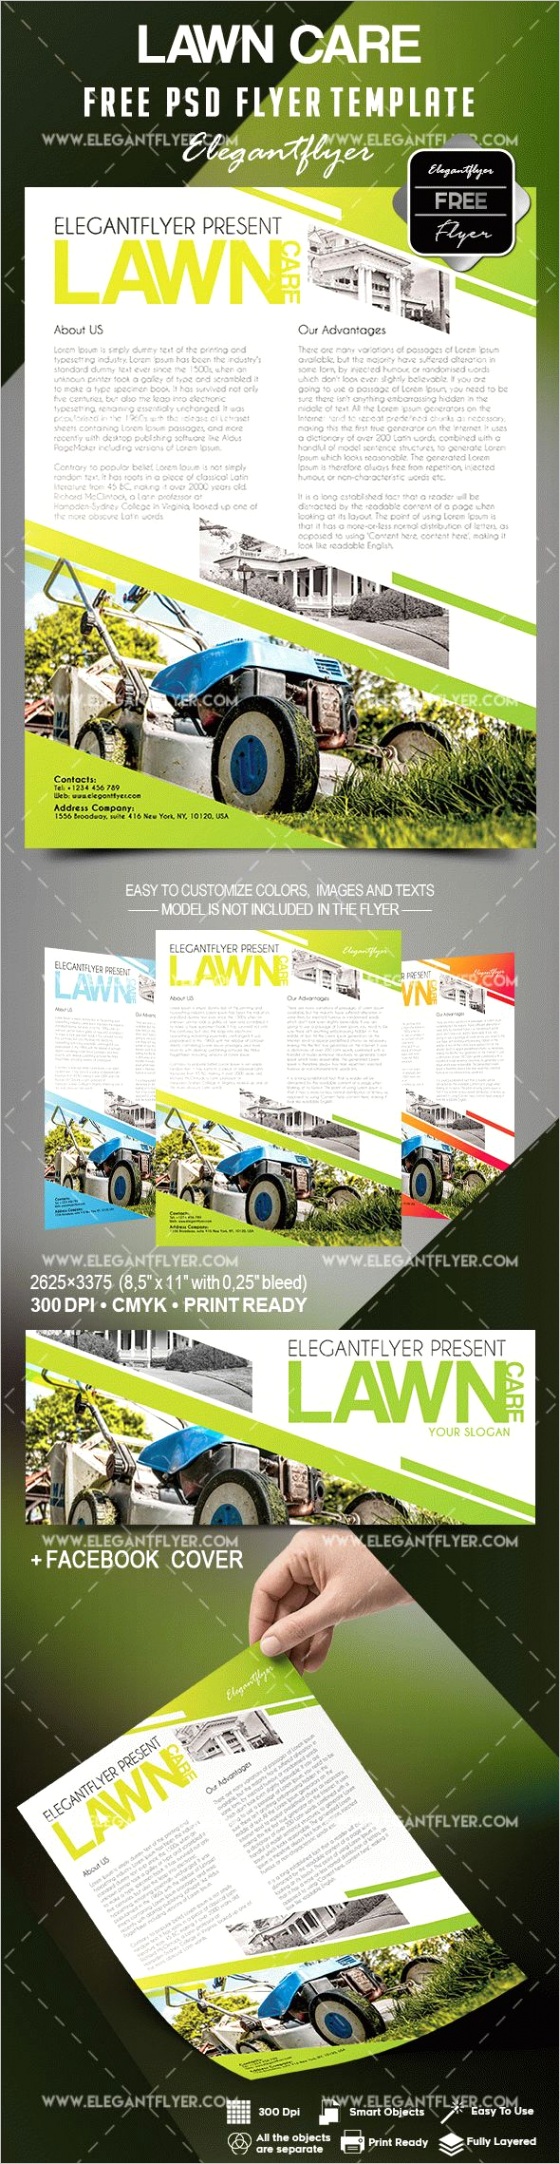 lawn1 care flyers templates free